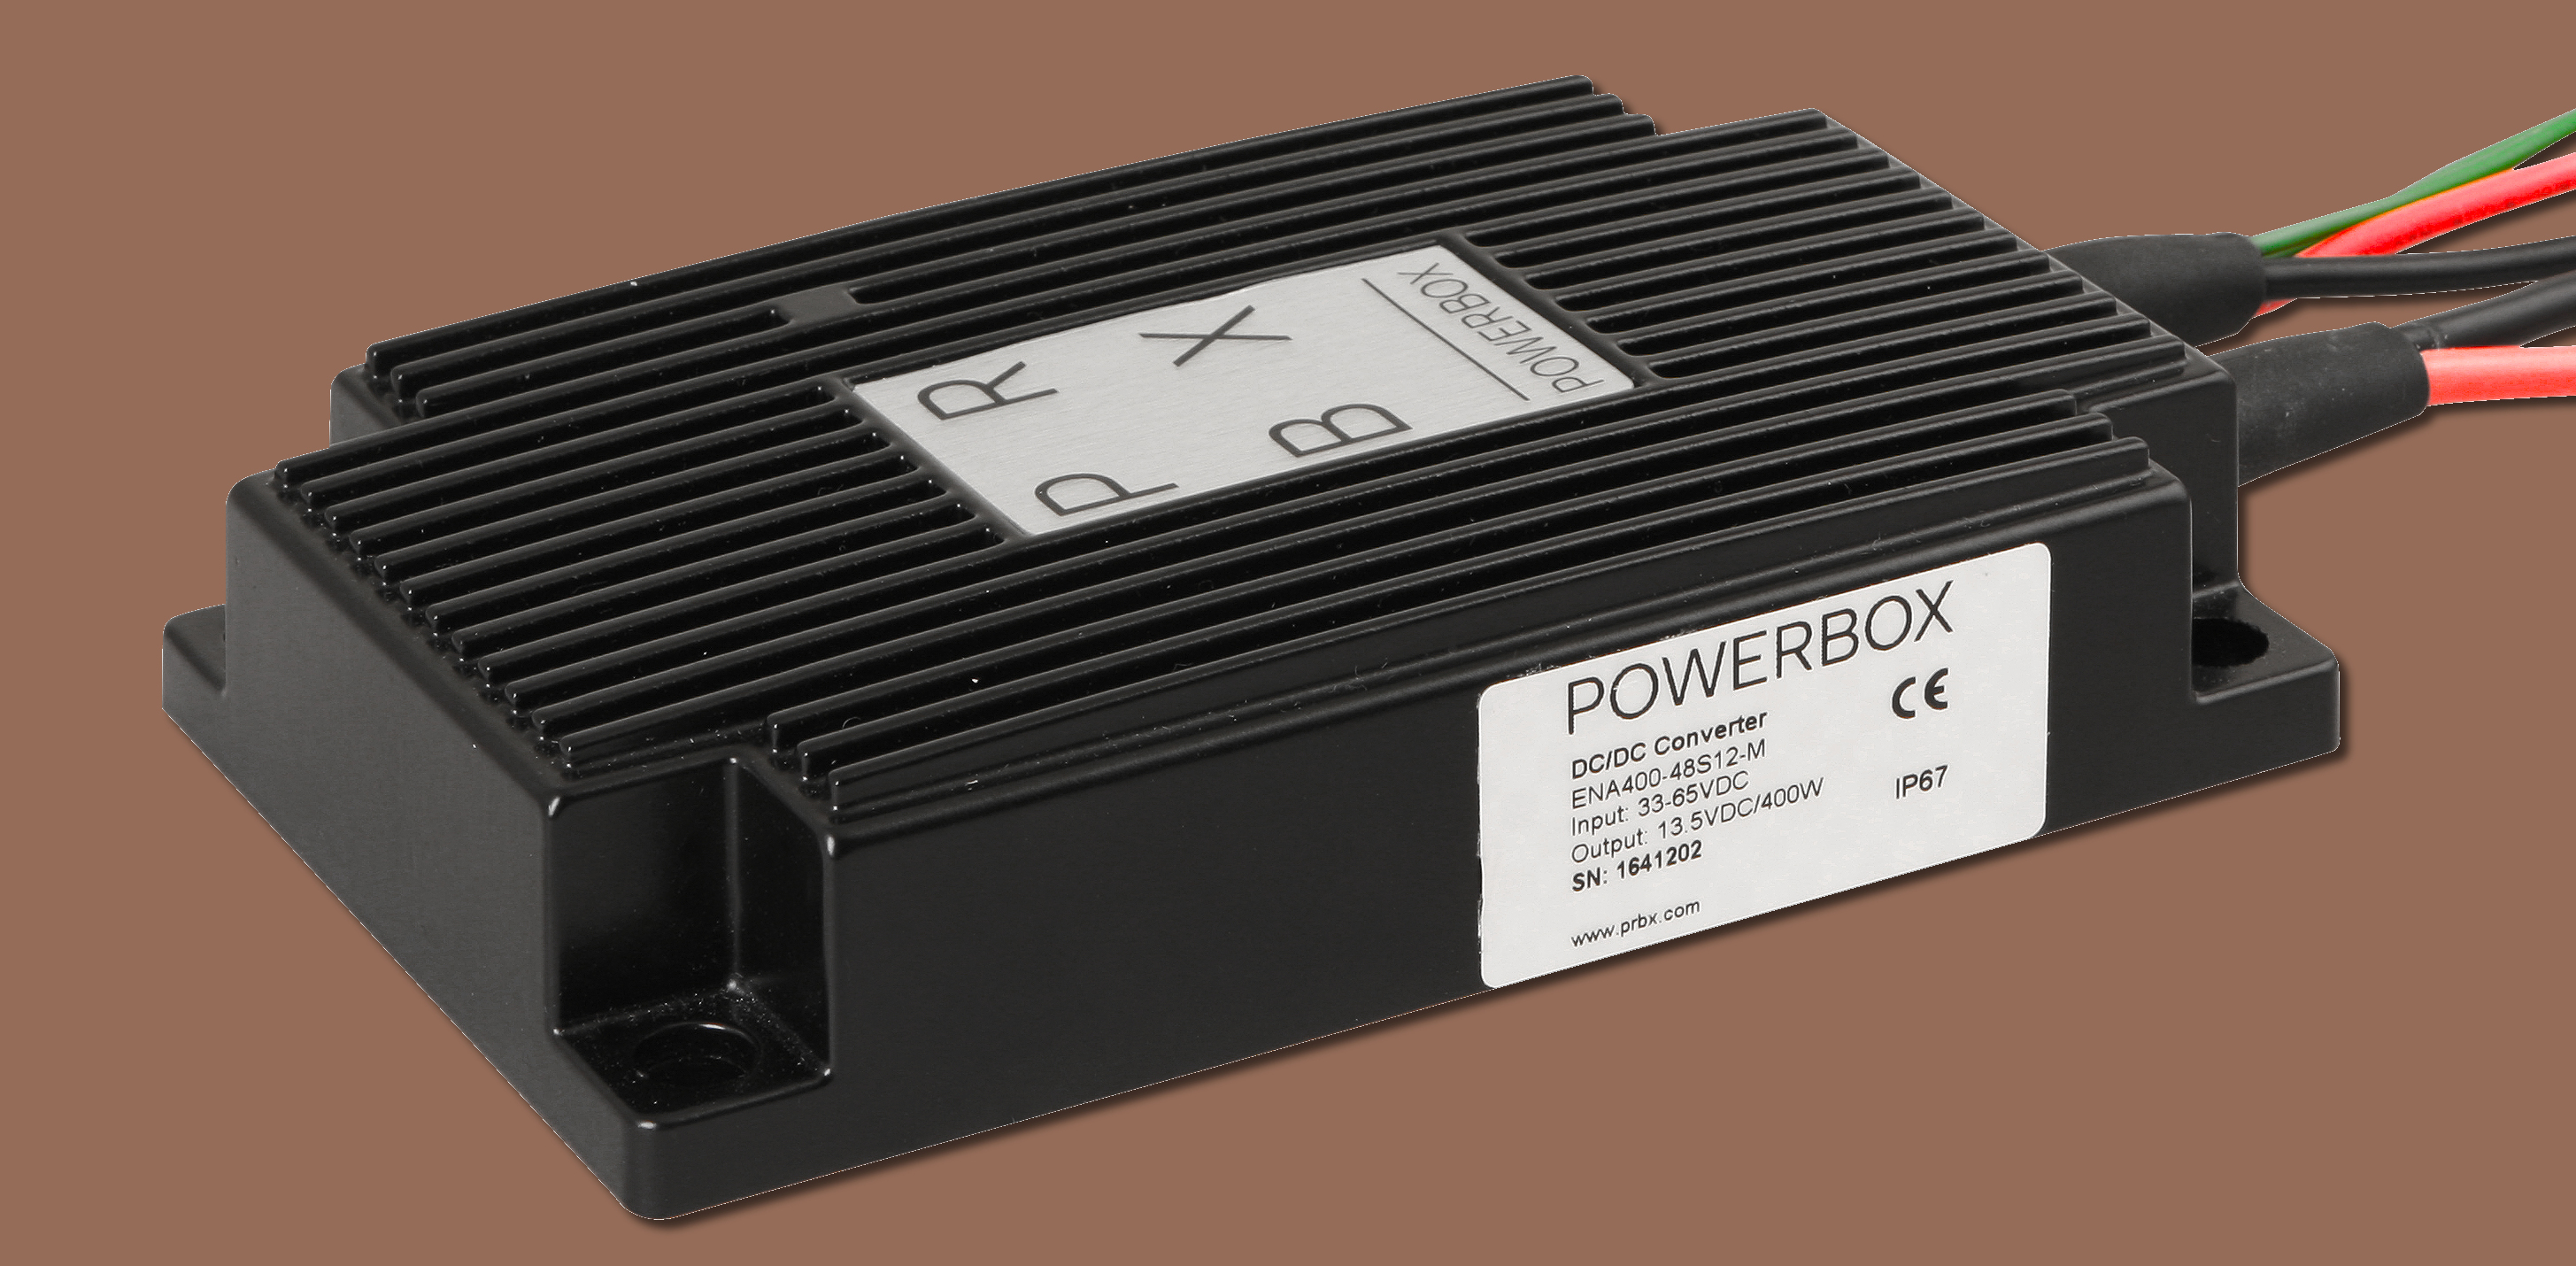 Powerbox’s rugged power modules are perfect for harsh environments in extreme industrial automotive applications